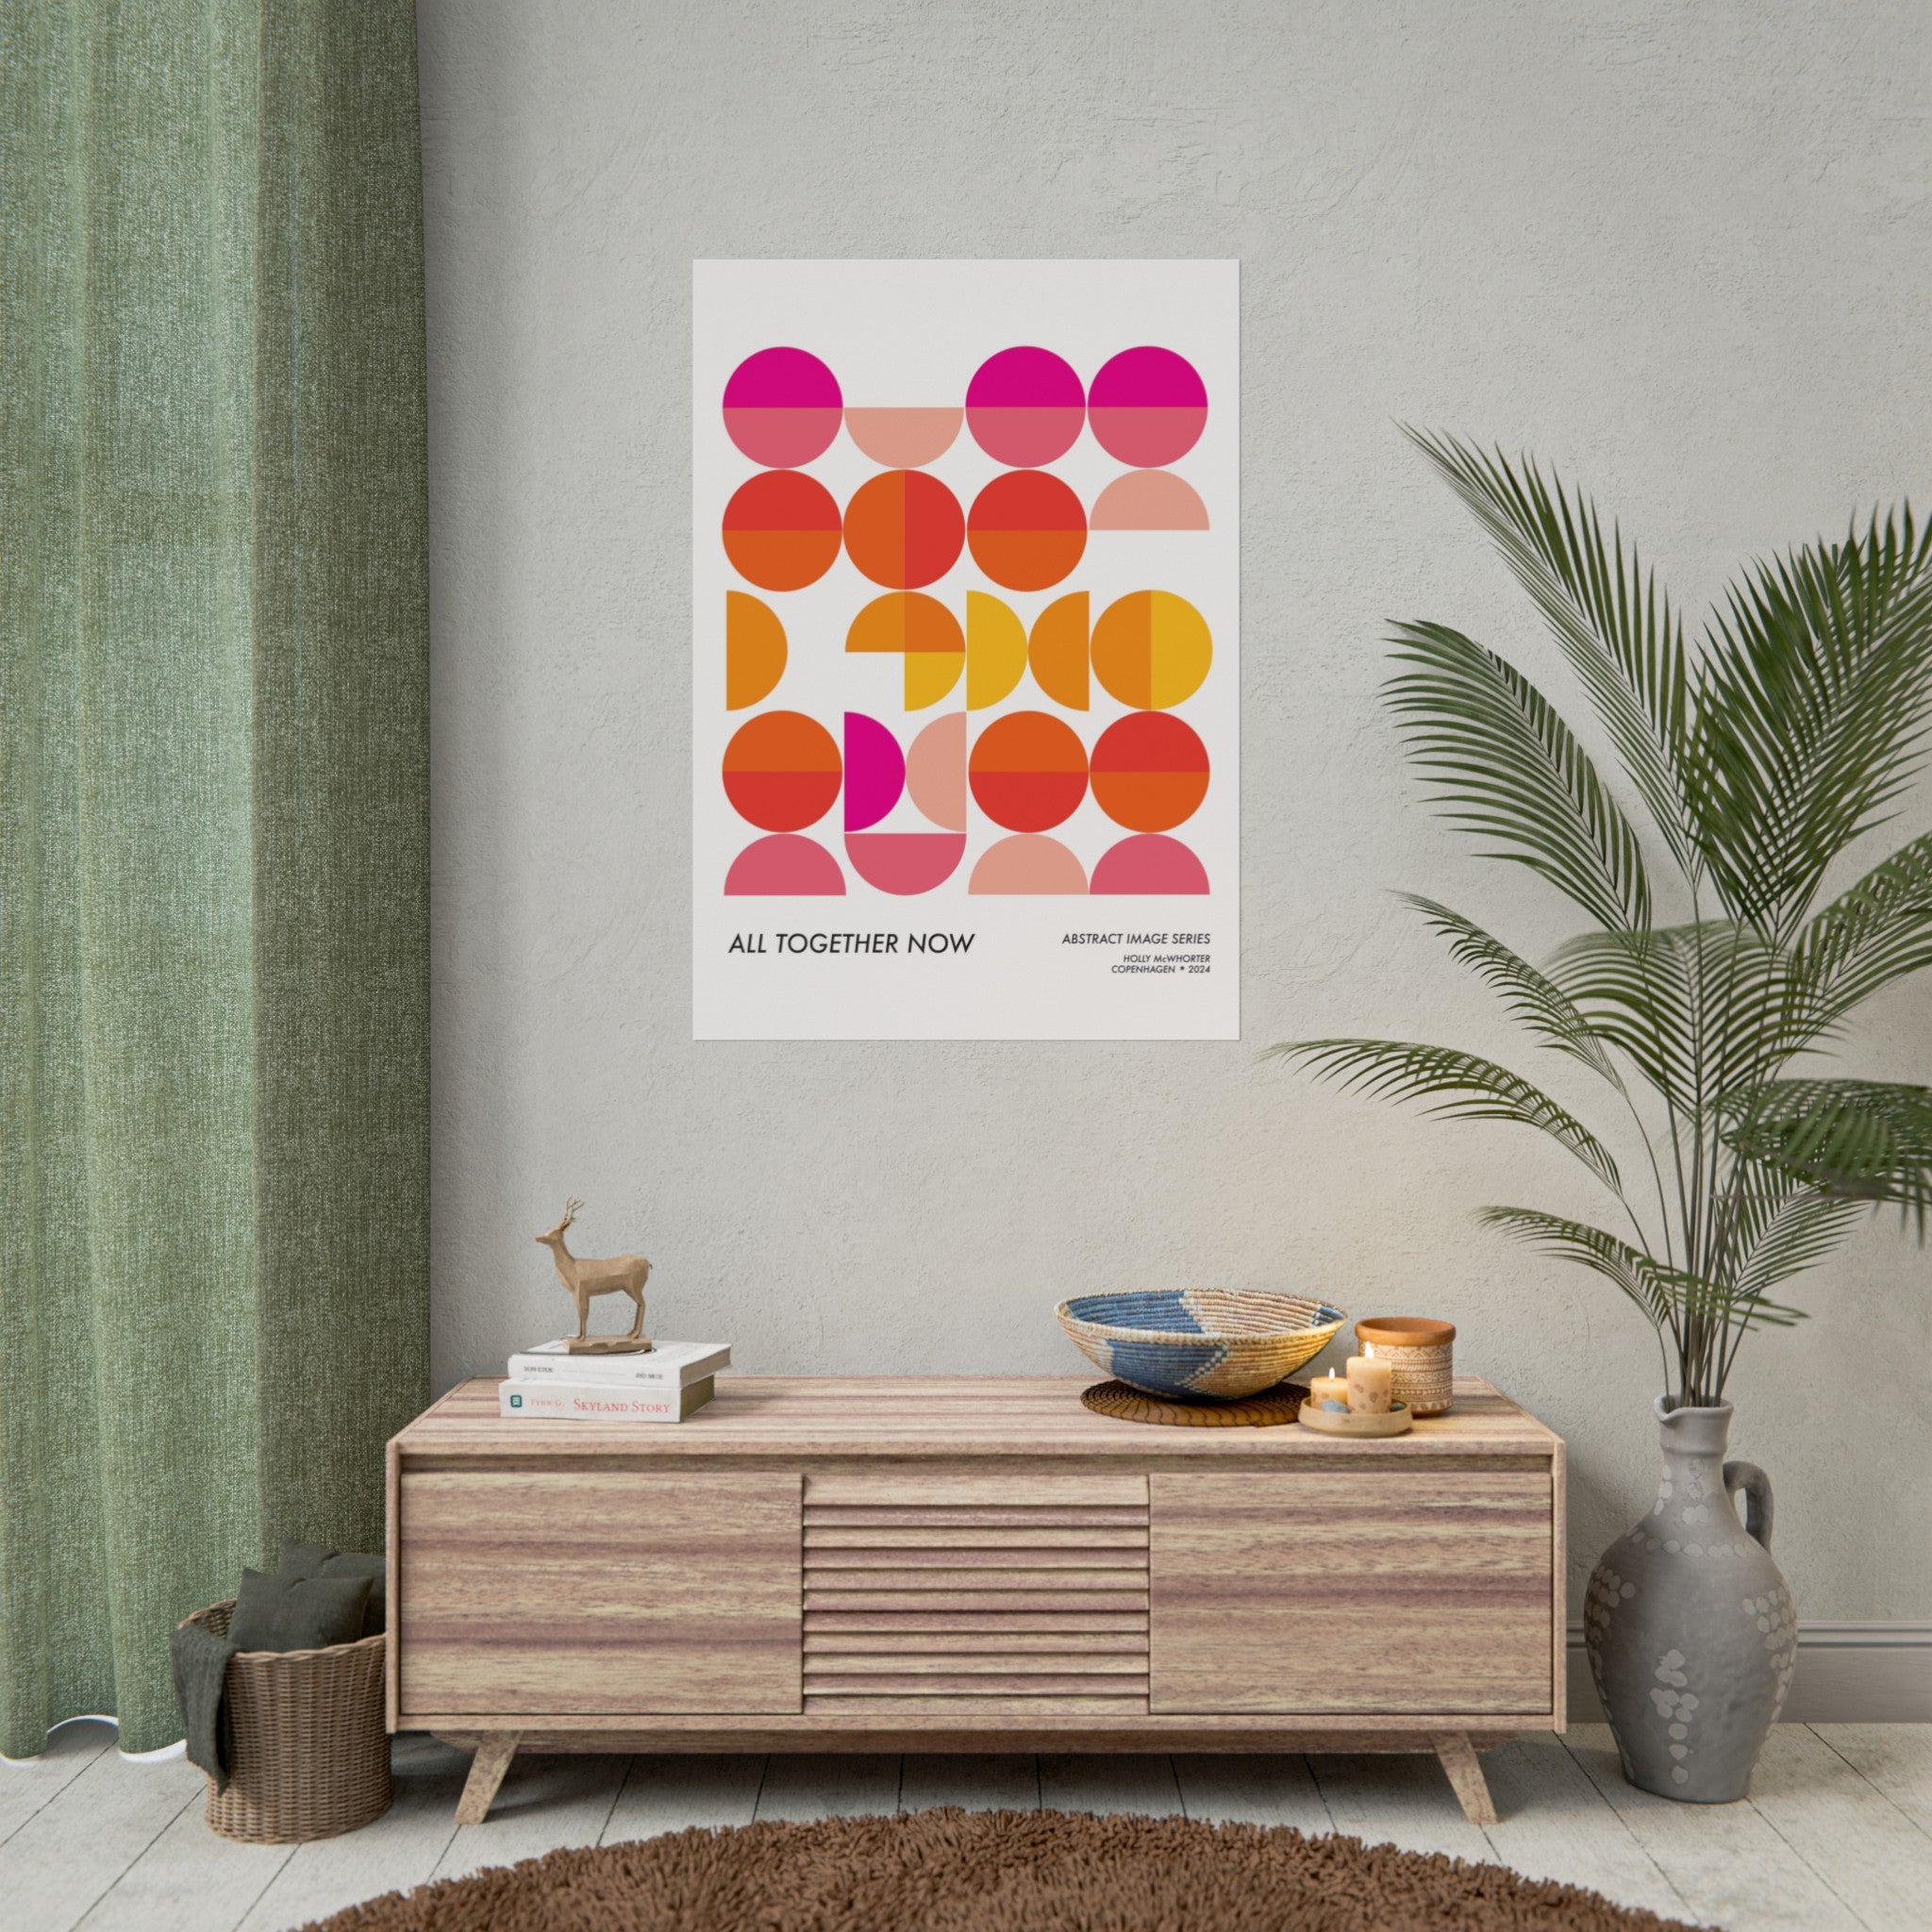 All Together Now - Fine Art Giclée Print by Holly McWhorter